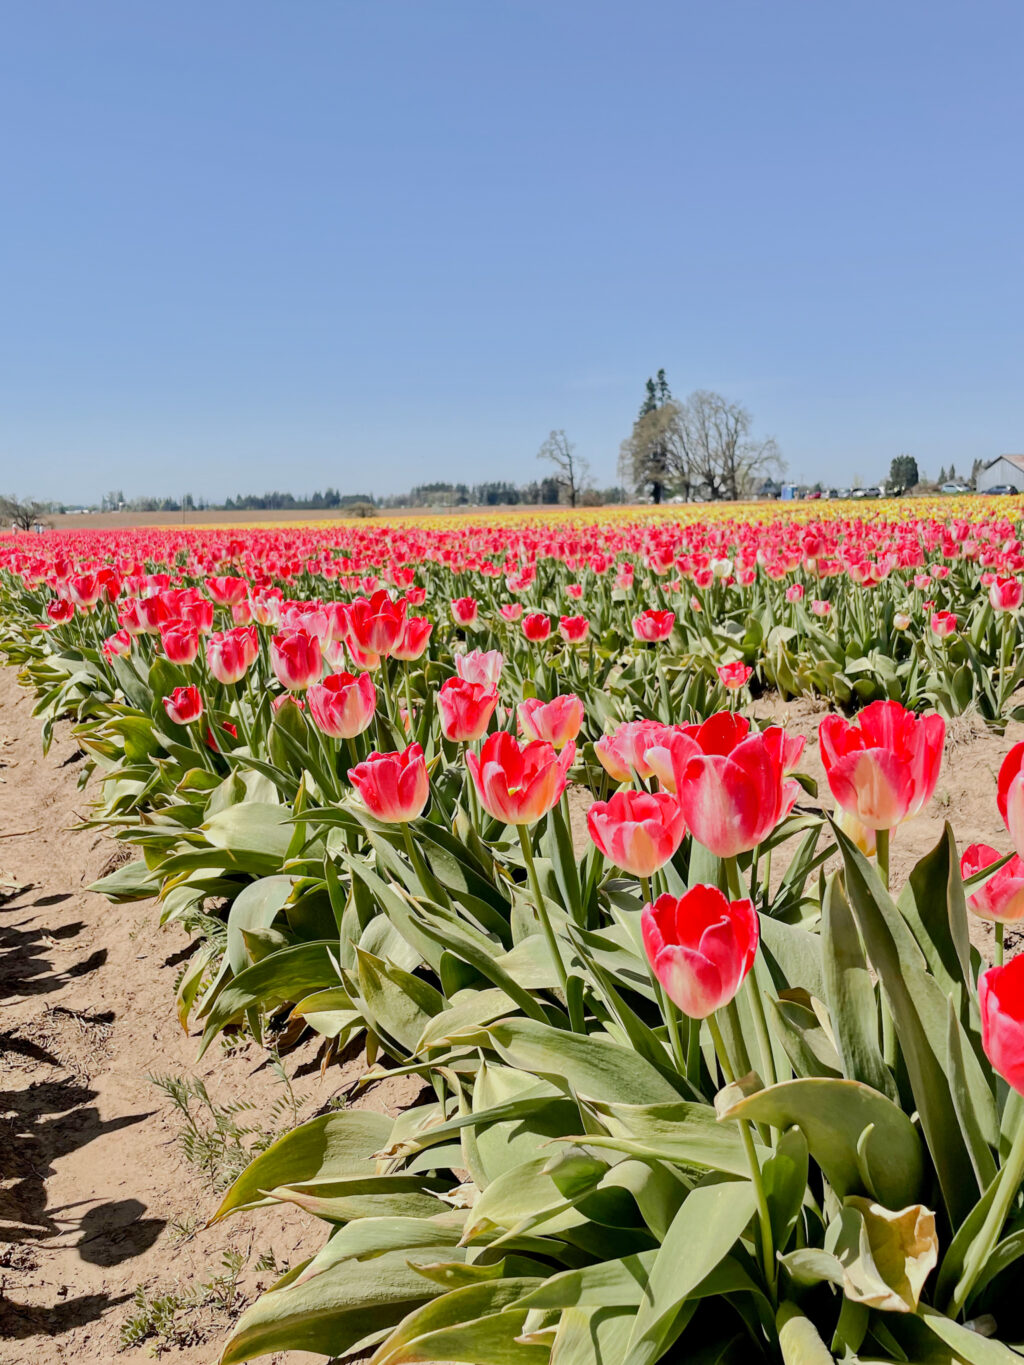 In bloom: Where to see flowers this spring